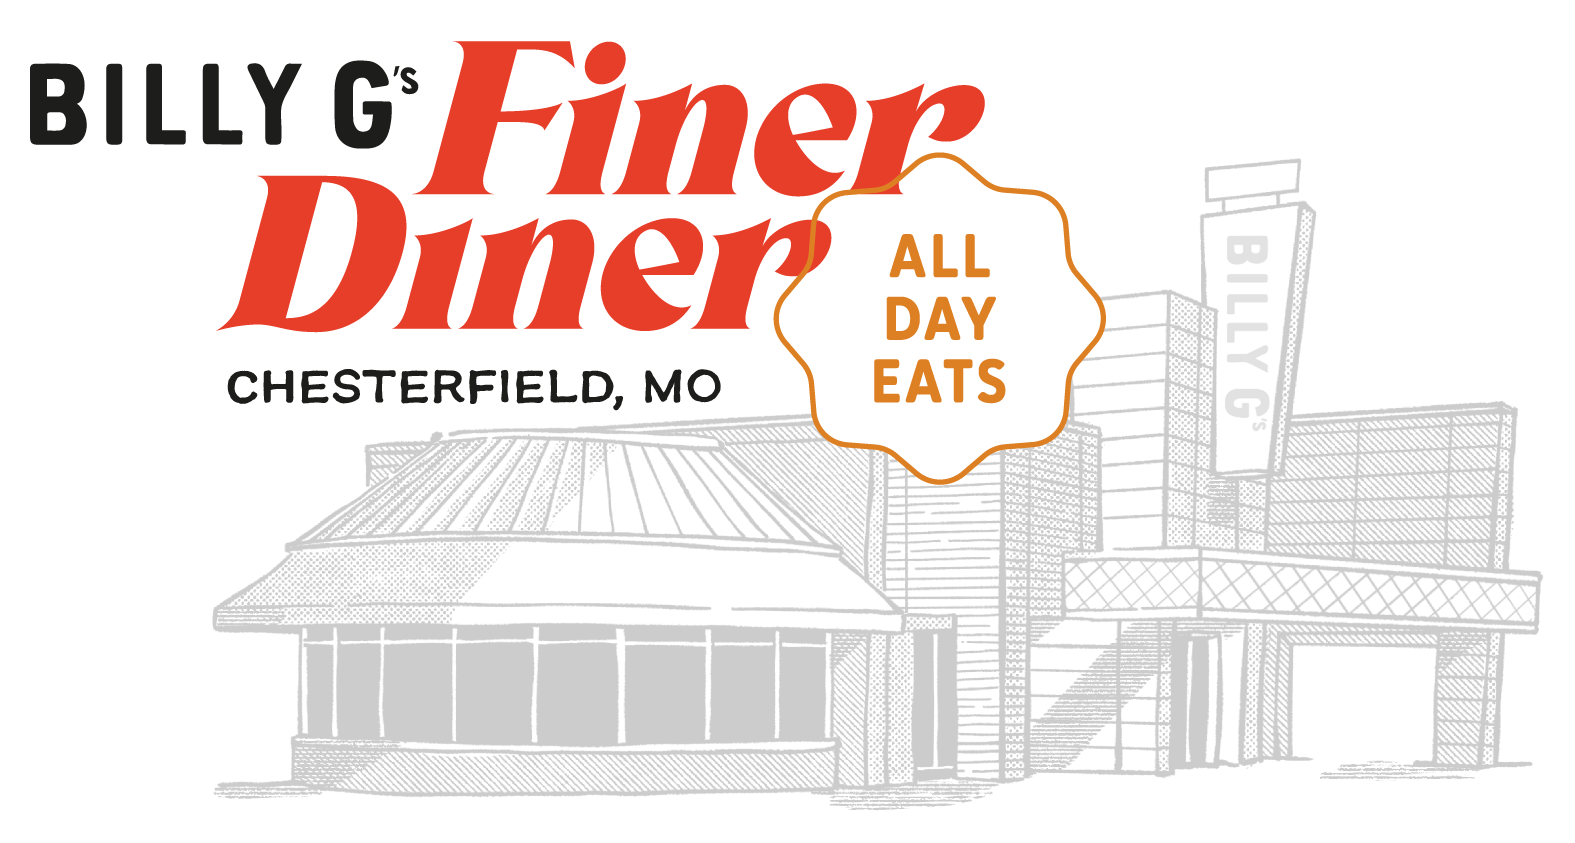 Billy G's Finer Diner, All Day Eats in Chesterfield, MO